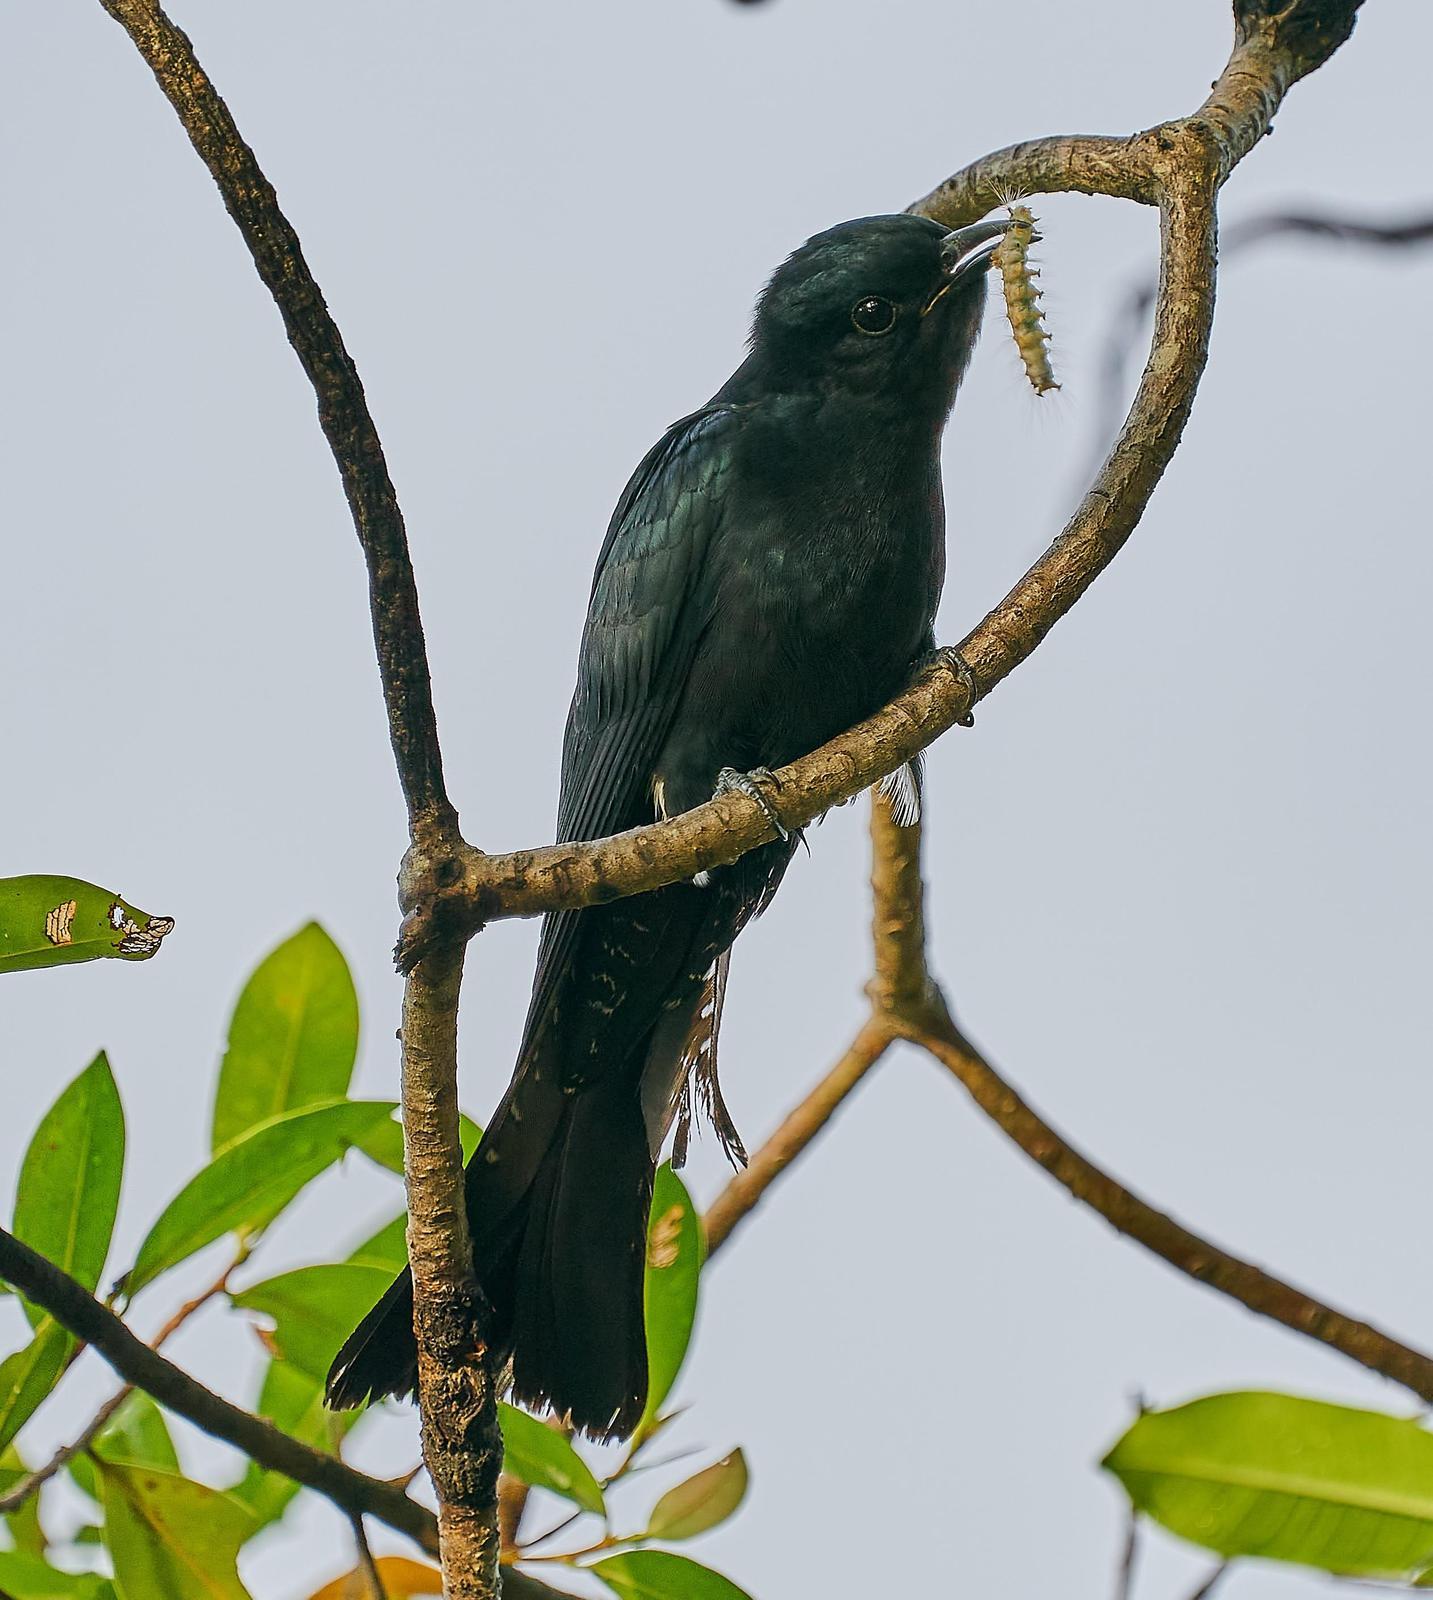 Square-tailed Drongo-Cuckoo Photo by Steven Cheong